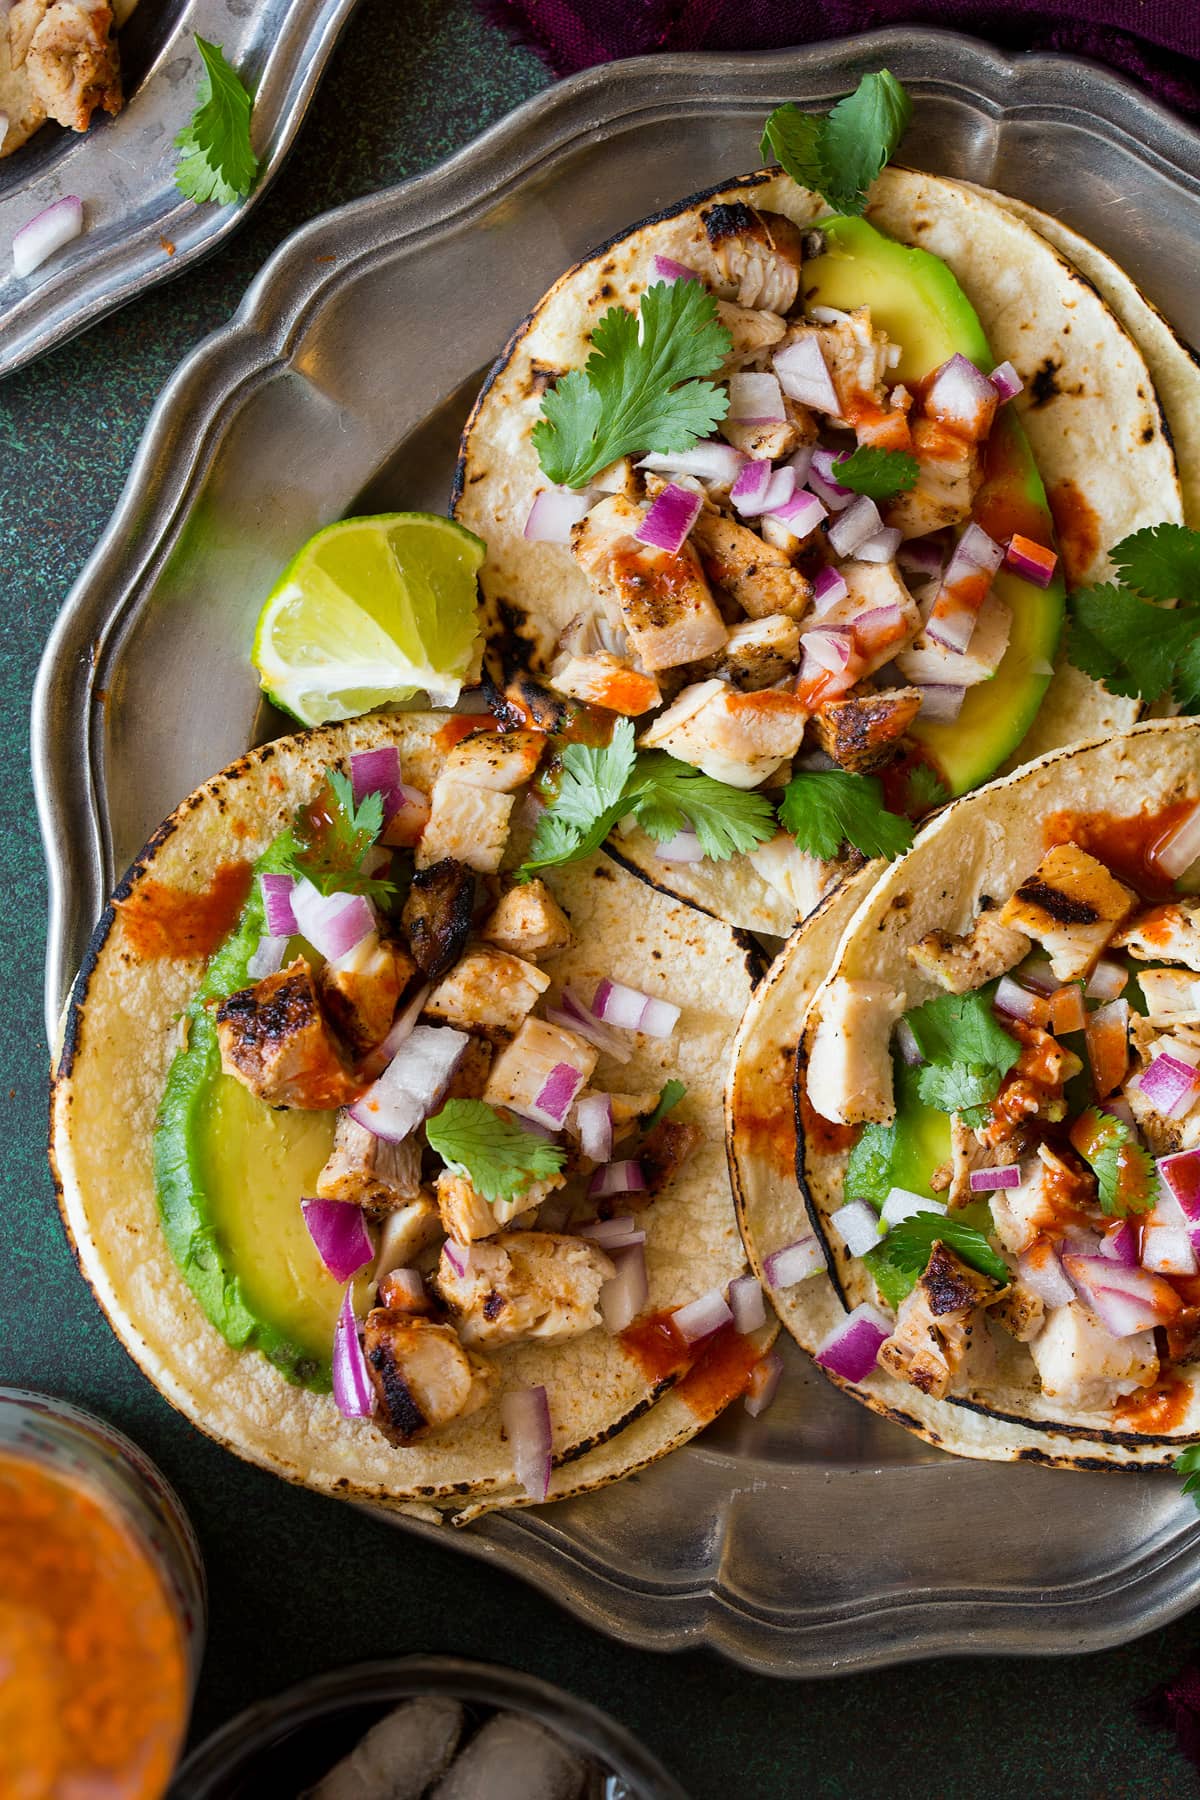 Image of 3 chicken street tacos on a metal plate. Tacos are made up of mini corn tortillas, grilled chicken, onion, cilantro, lime, avocado and Mexican hot sauce.